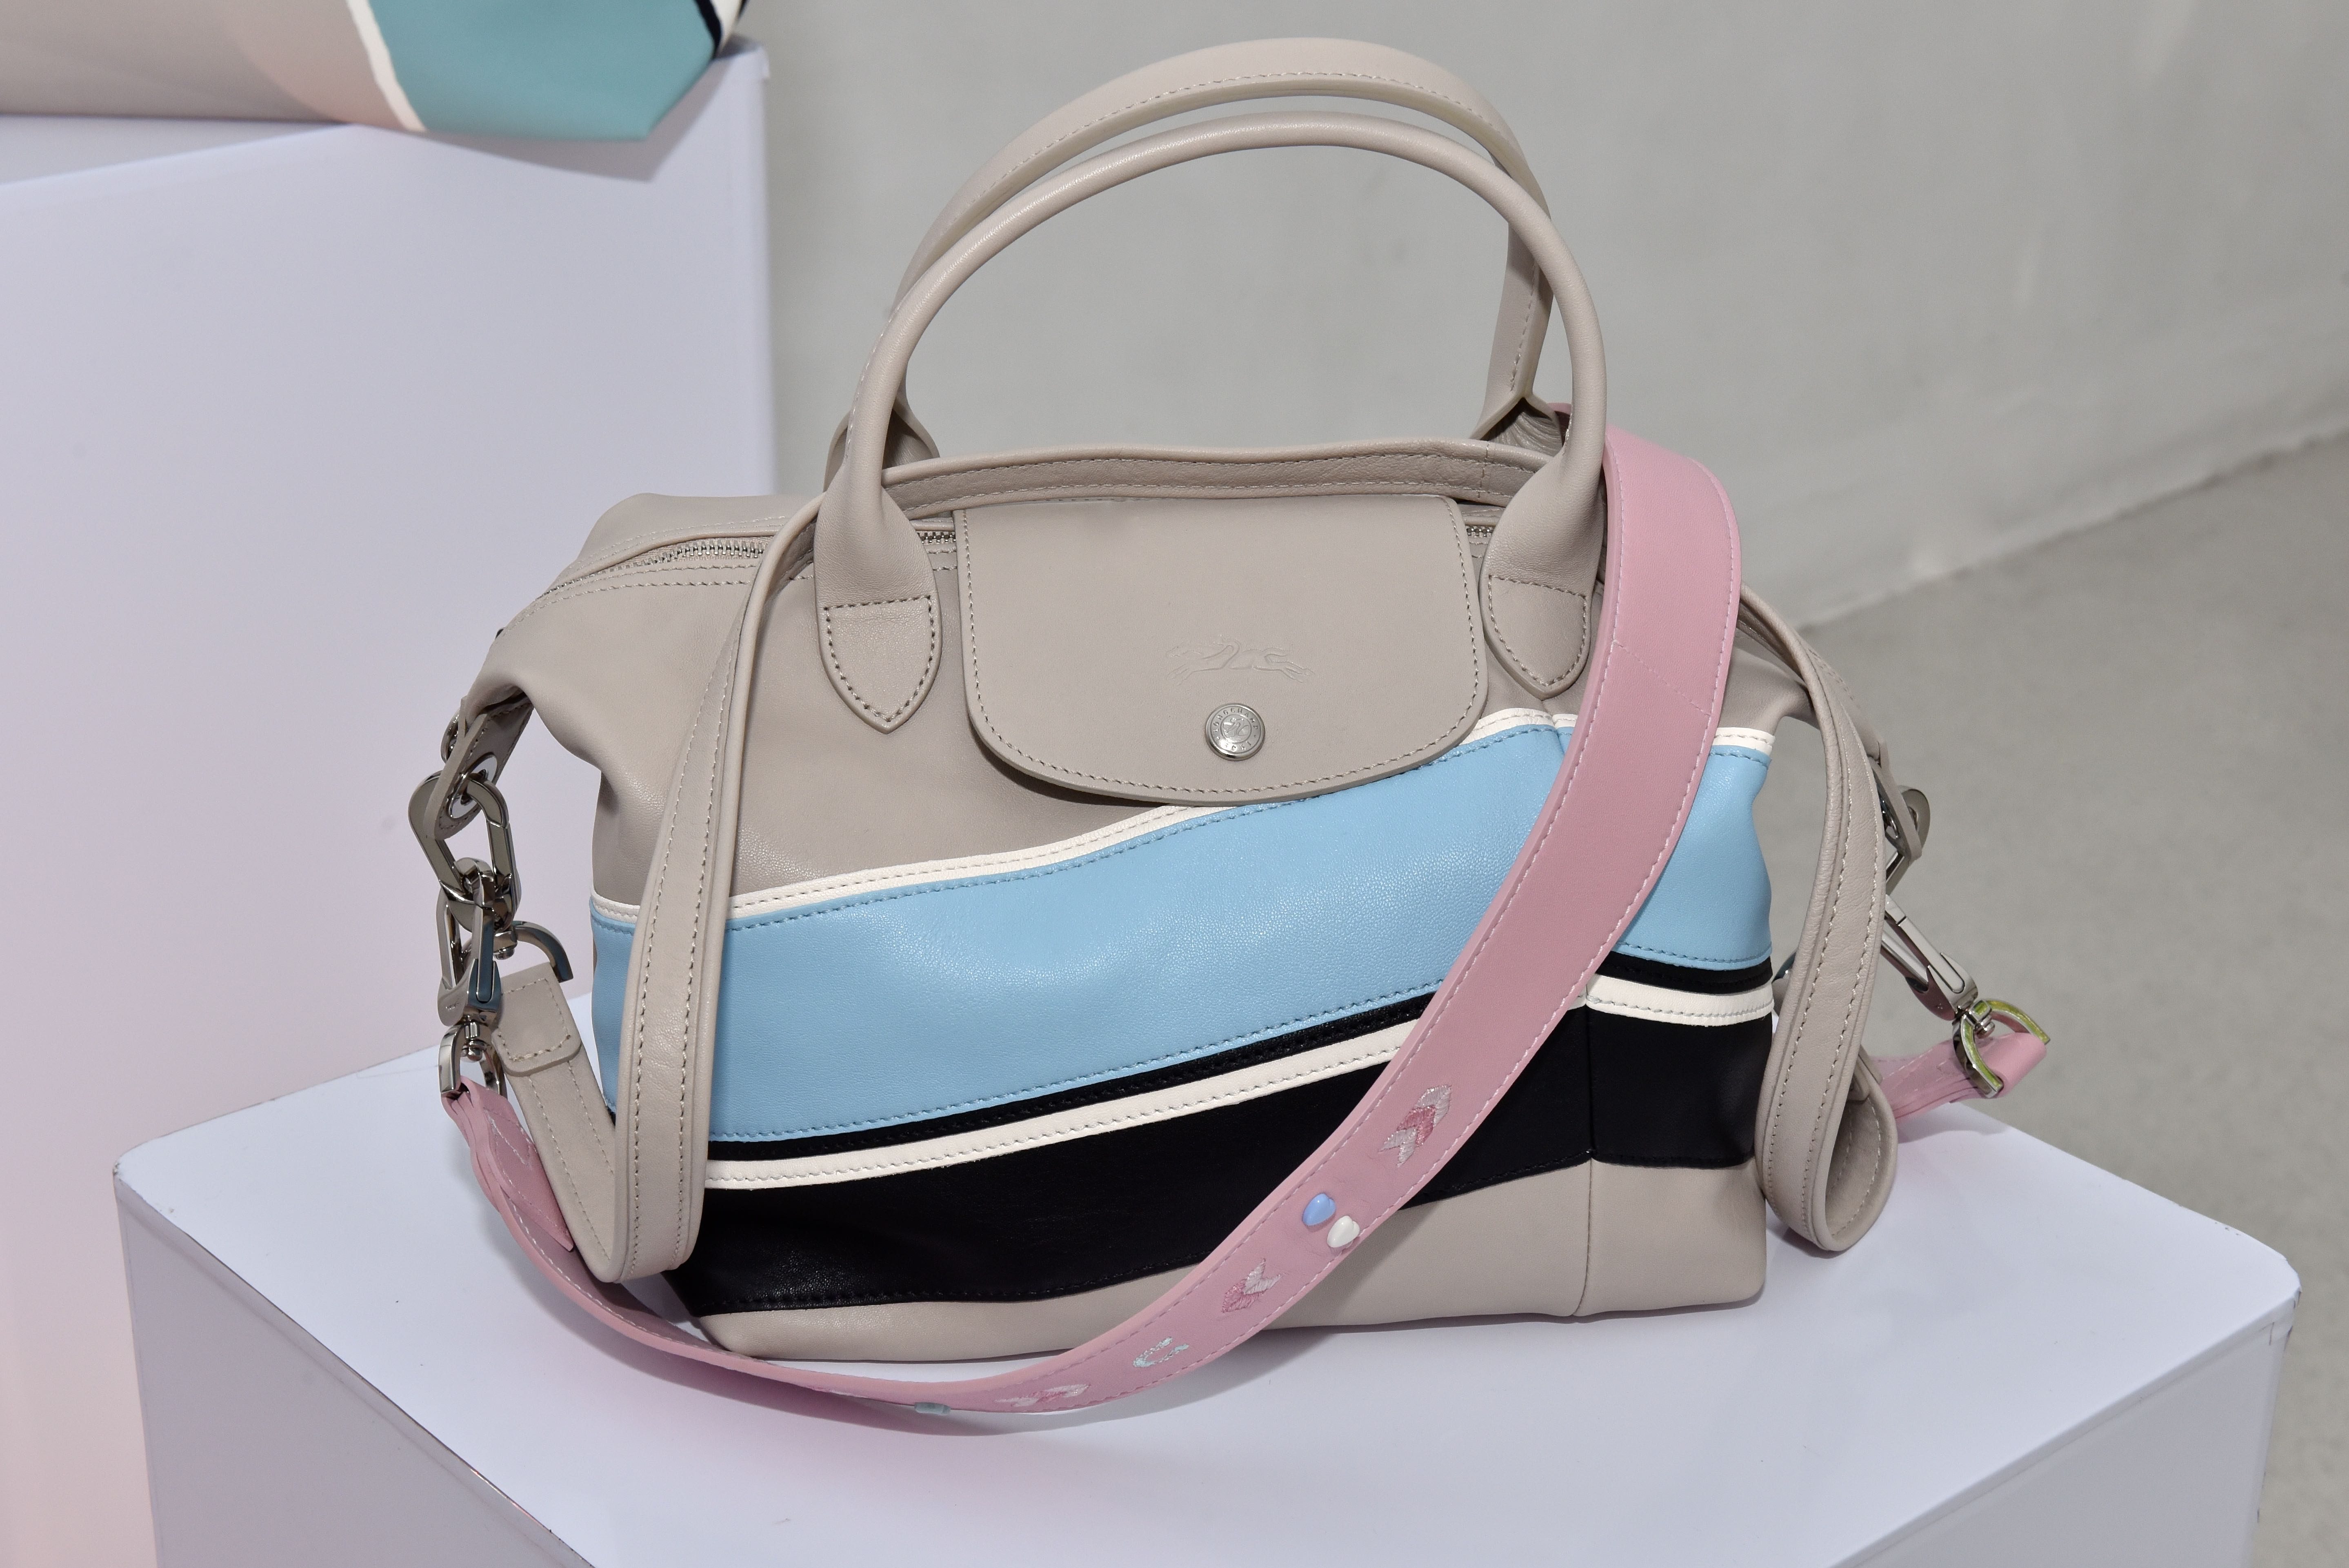 CLASSIC WITH A TWIST. The newest leather Le Pliage Cuir 